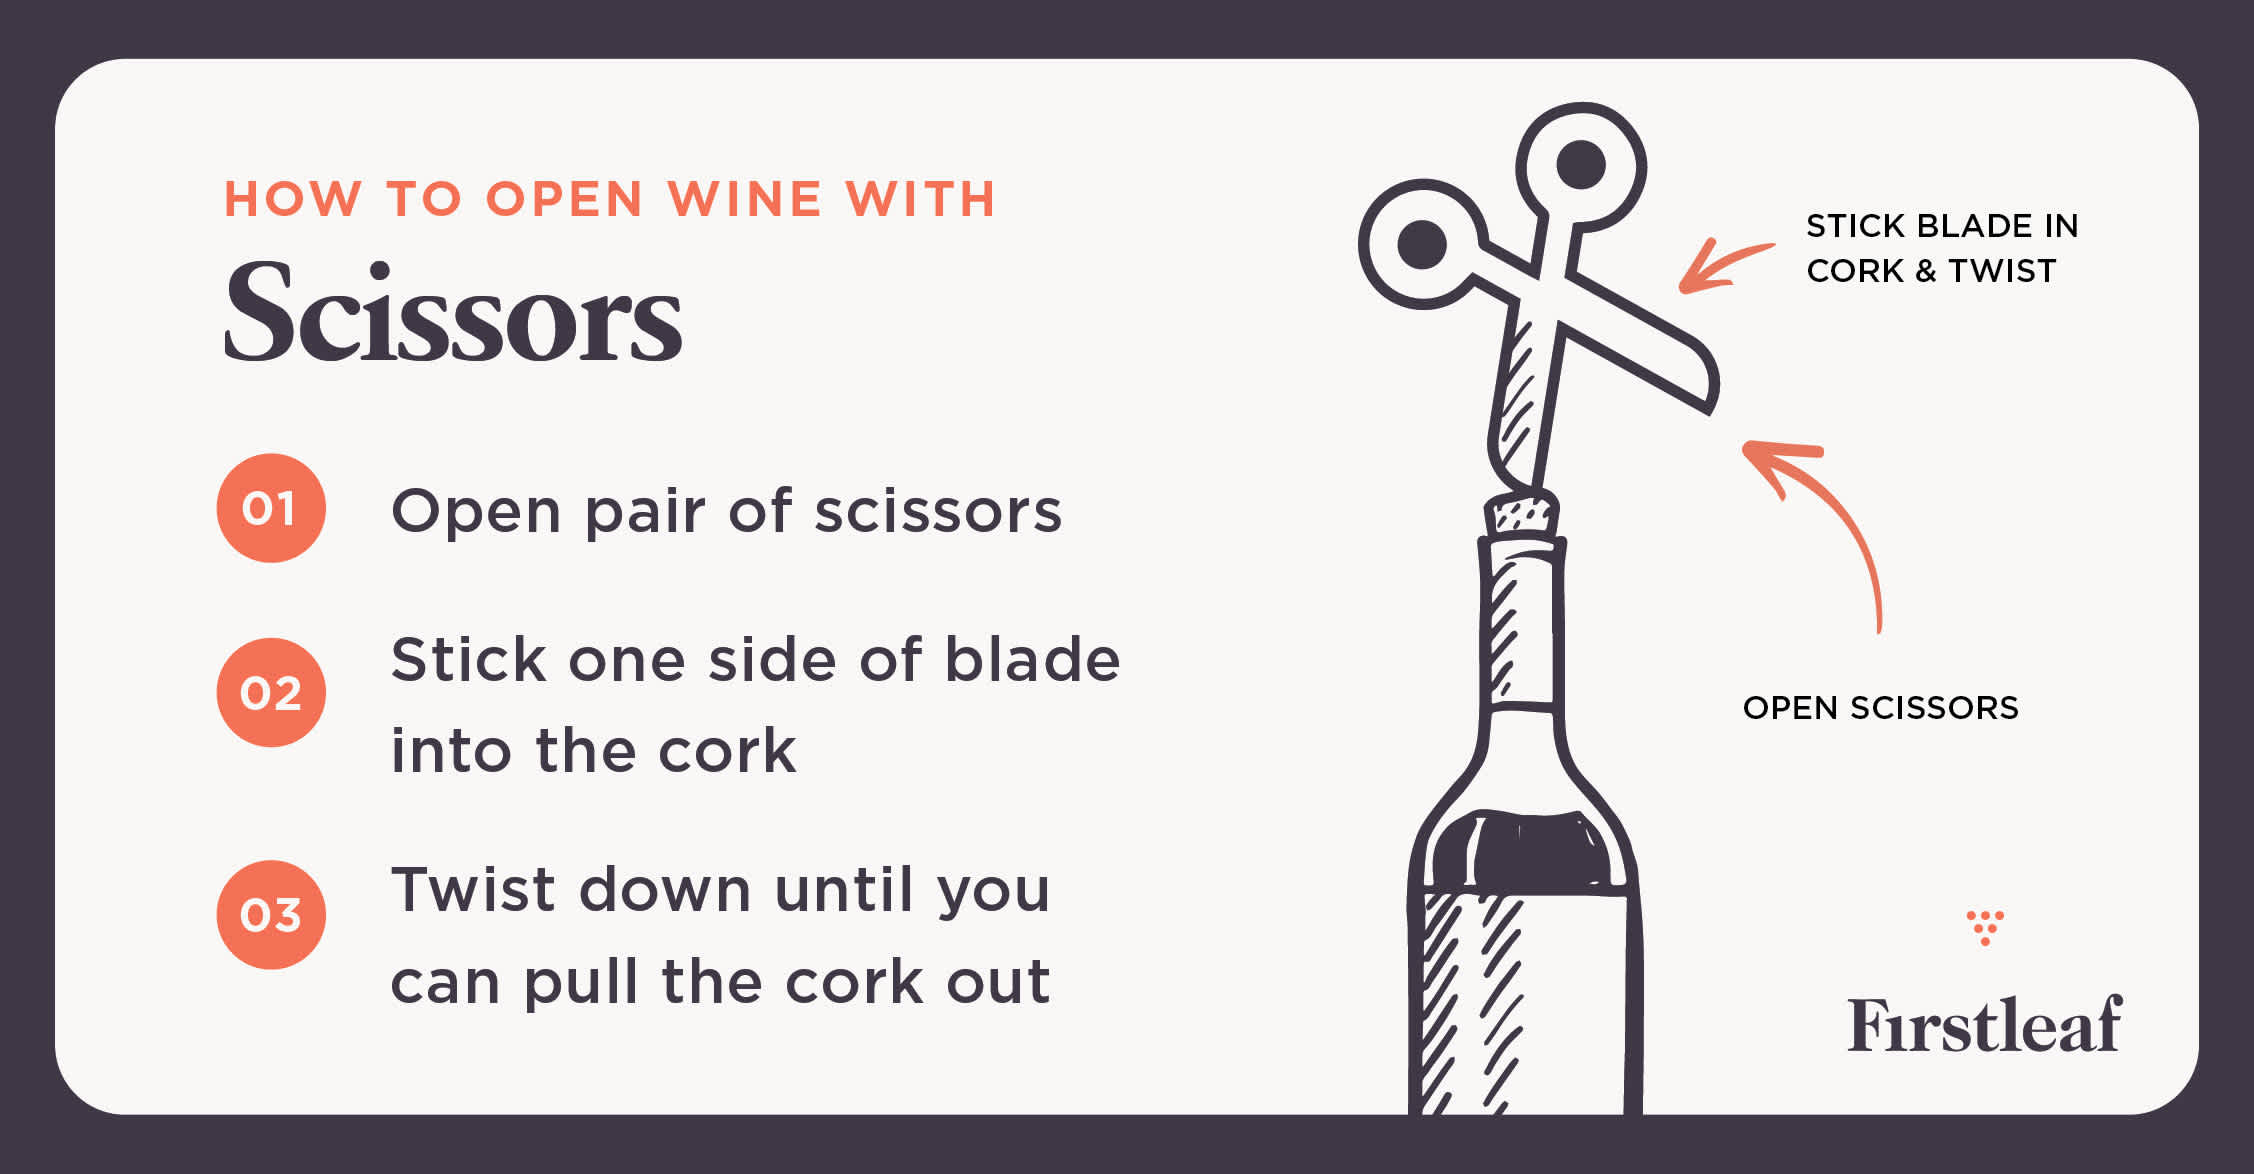 4 Ways to Open a Wine Bottle Without a Corkscrew, According to Wine Experts